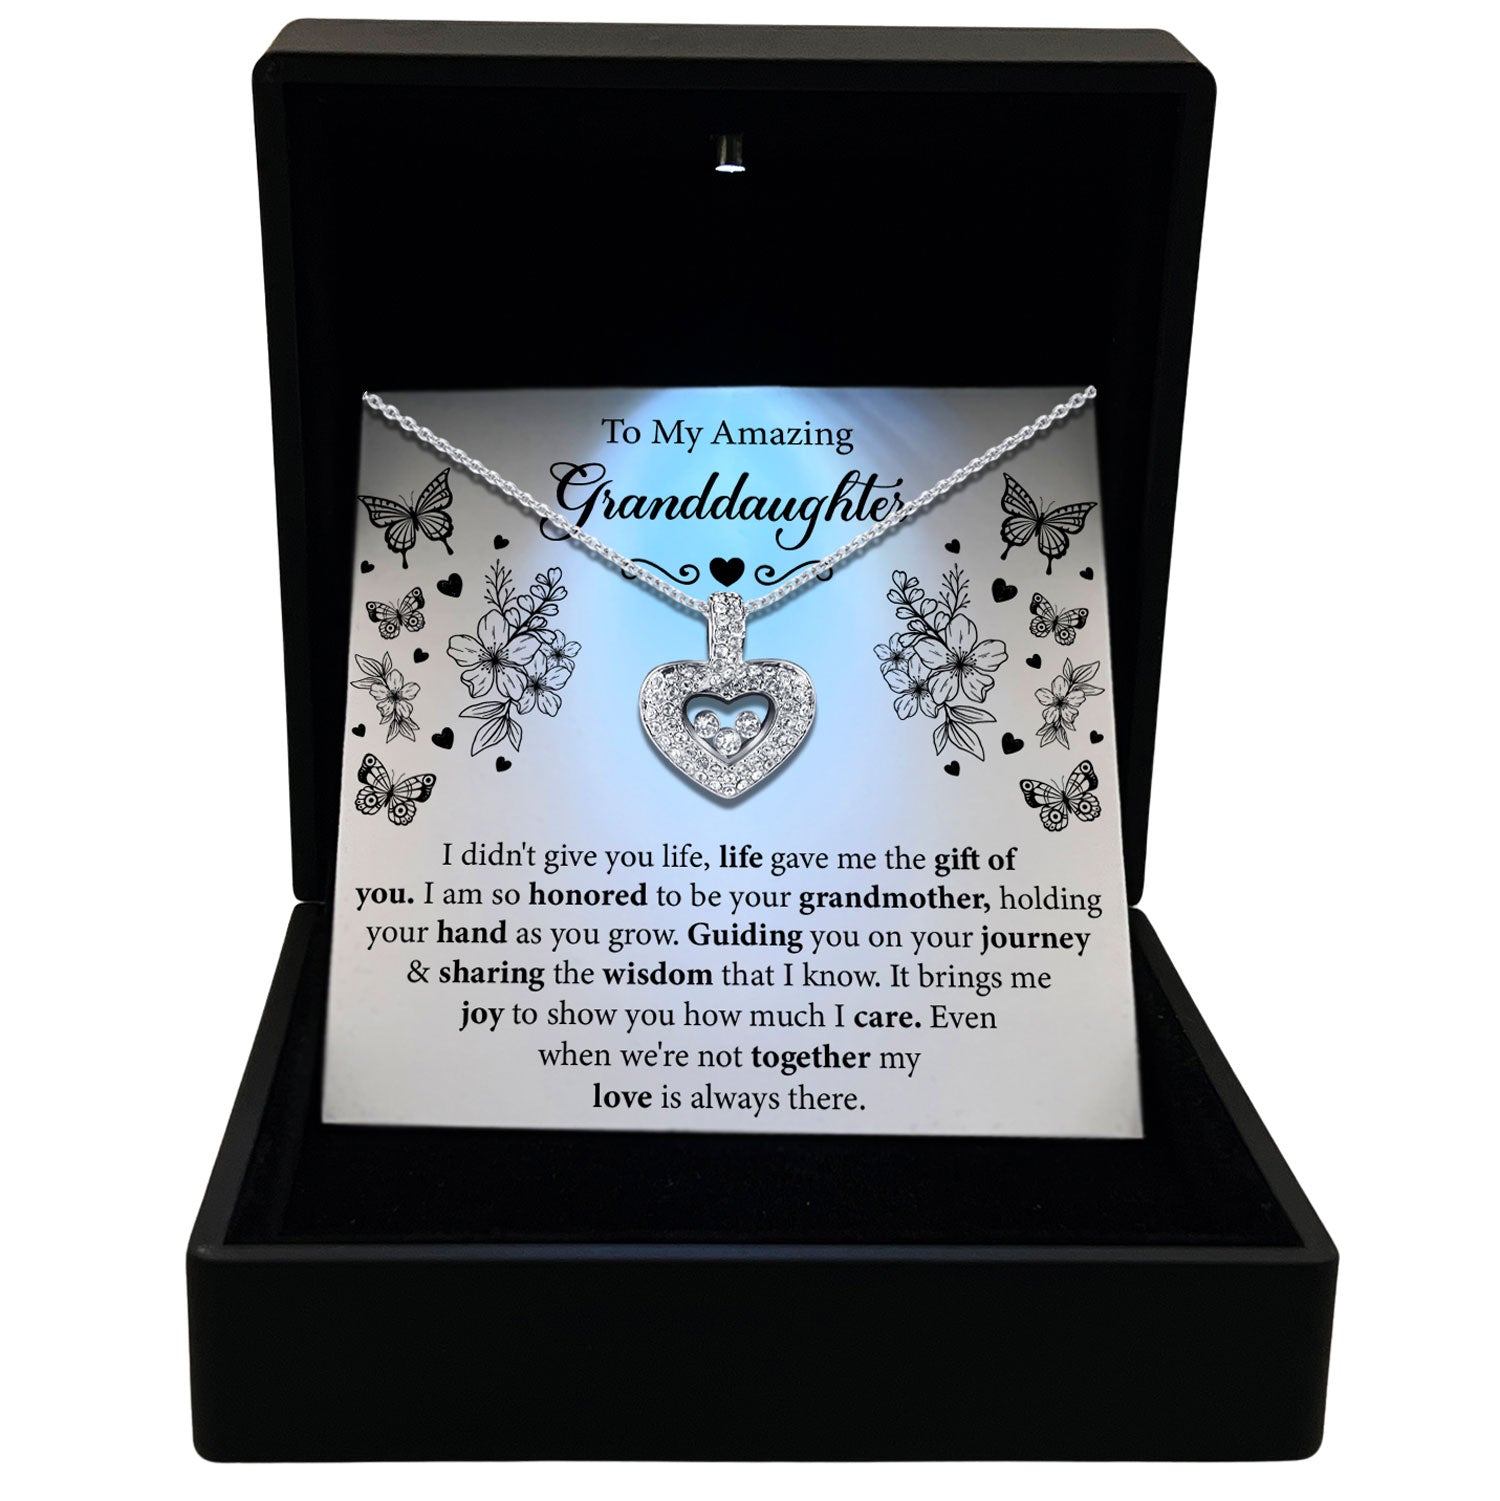 To My Amazing Granddaughter - My Love Is Always There - Tryndi Floating Heart Necklace